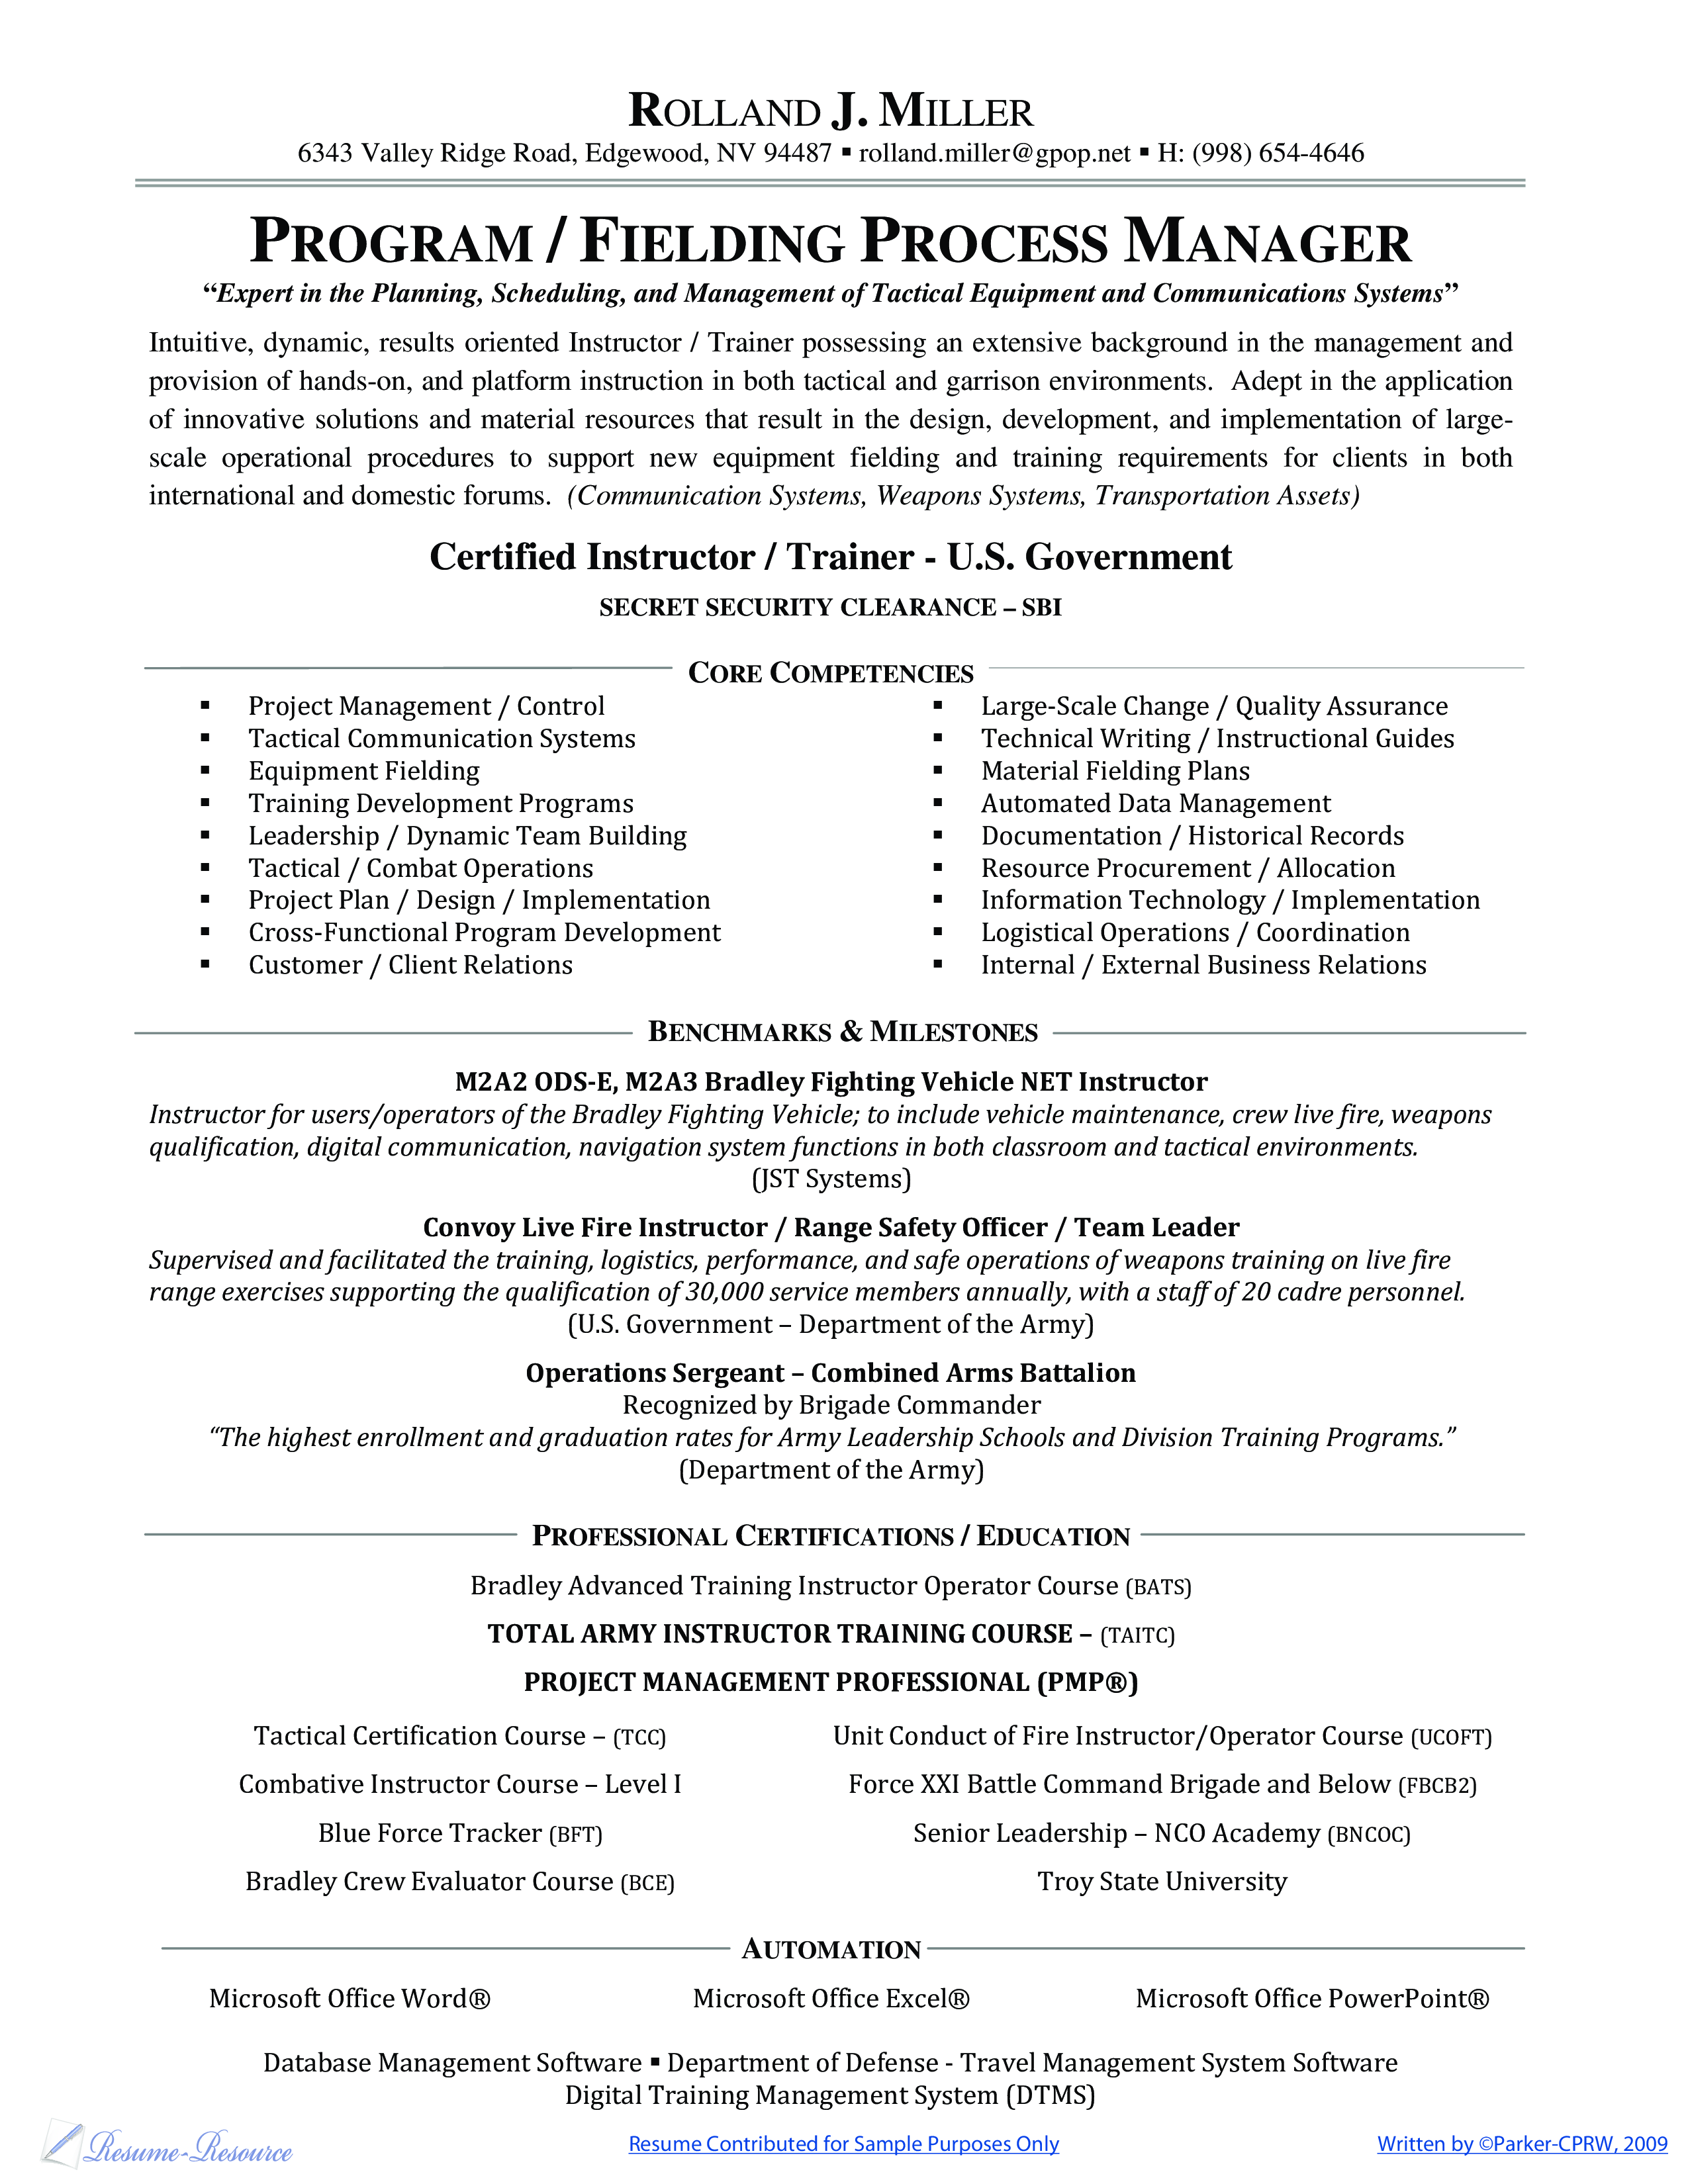 Process Manager Resume main image